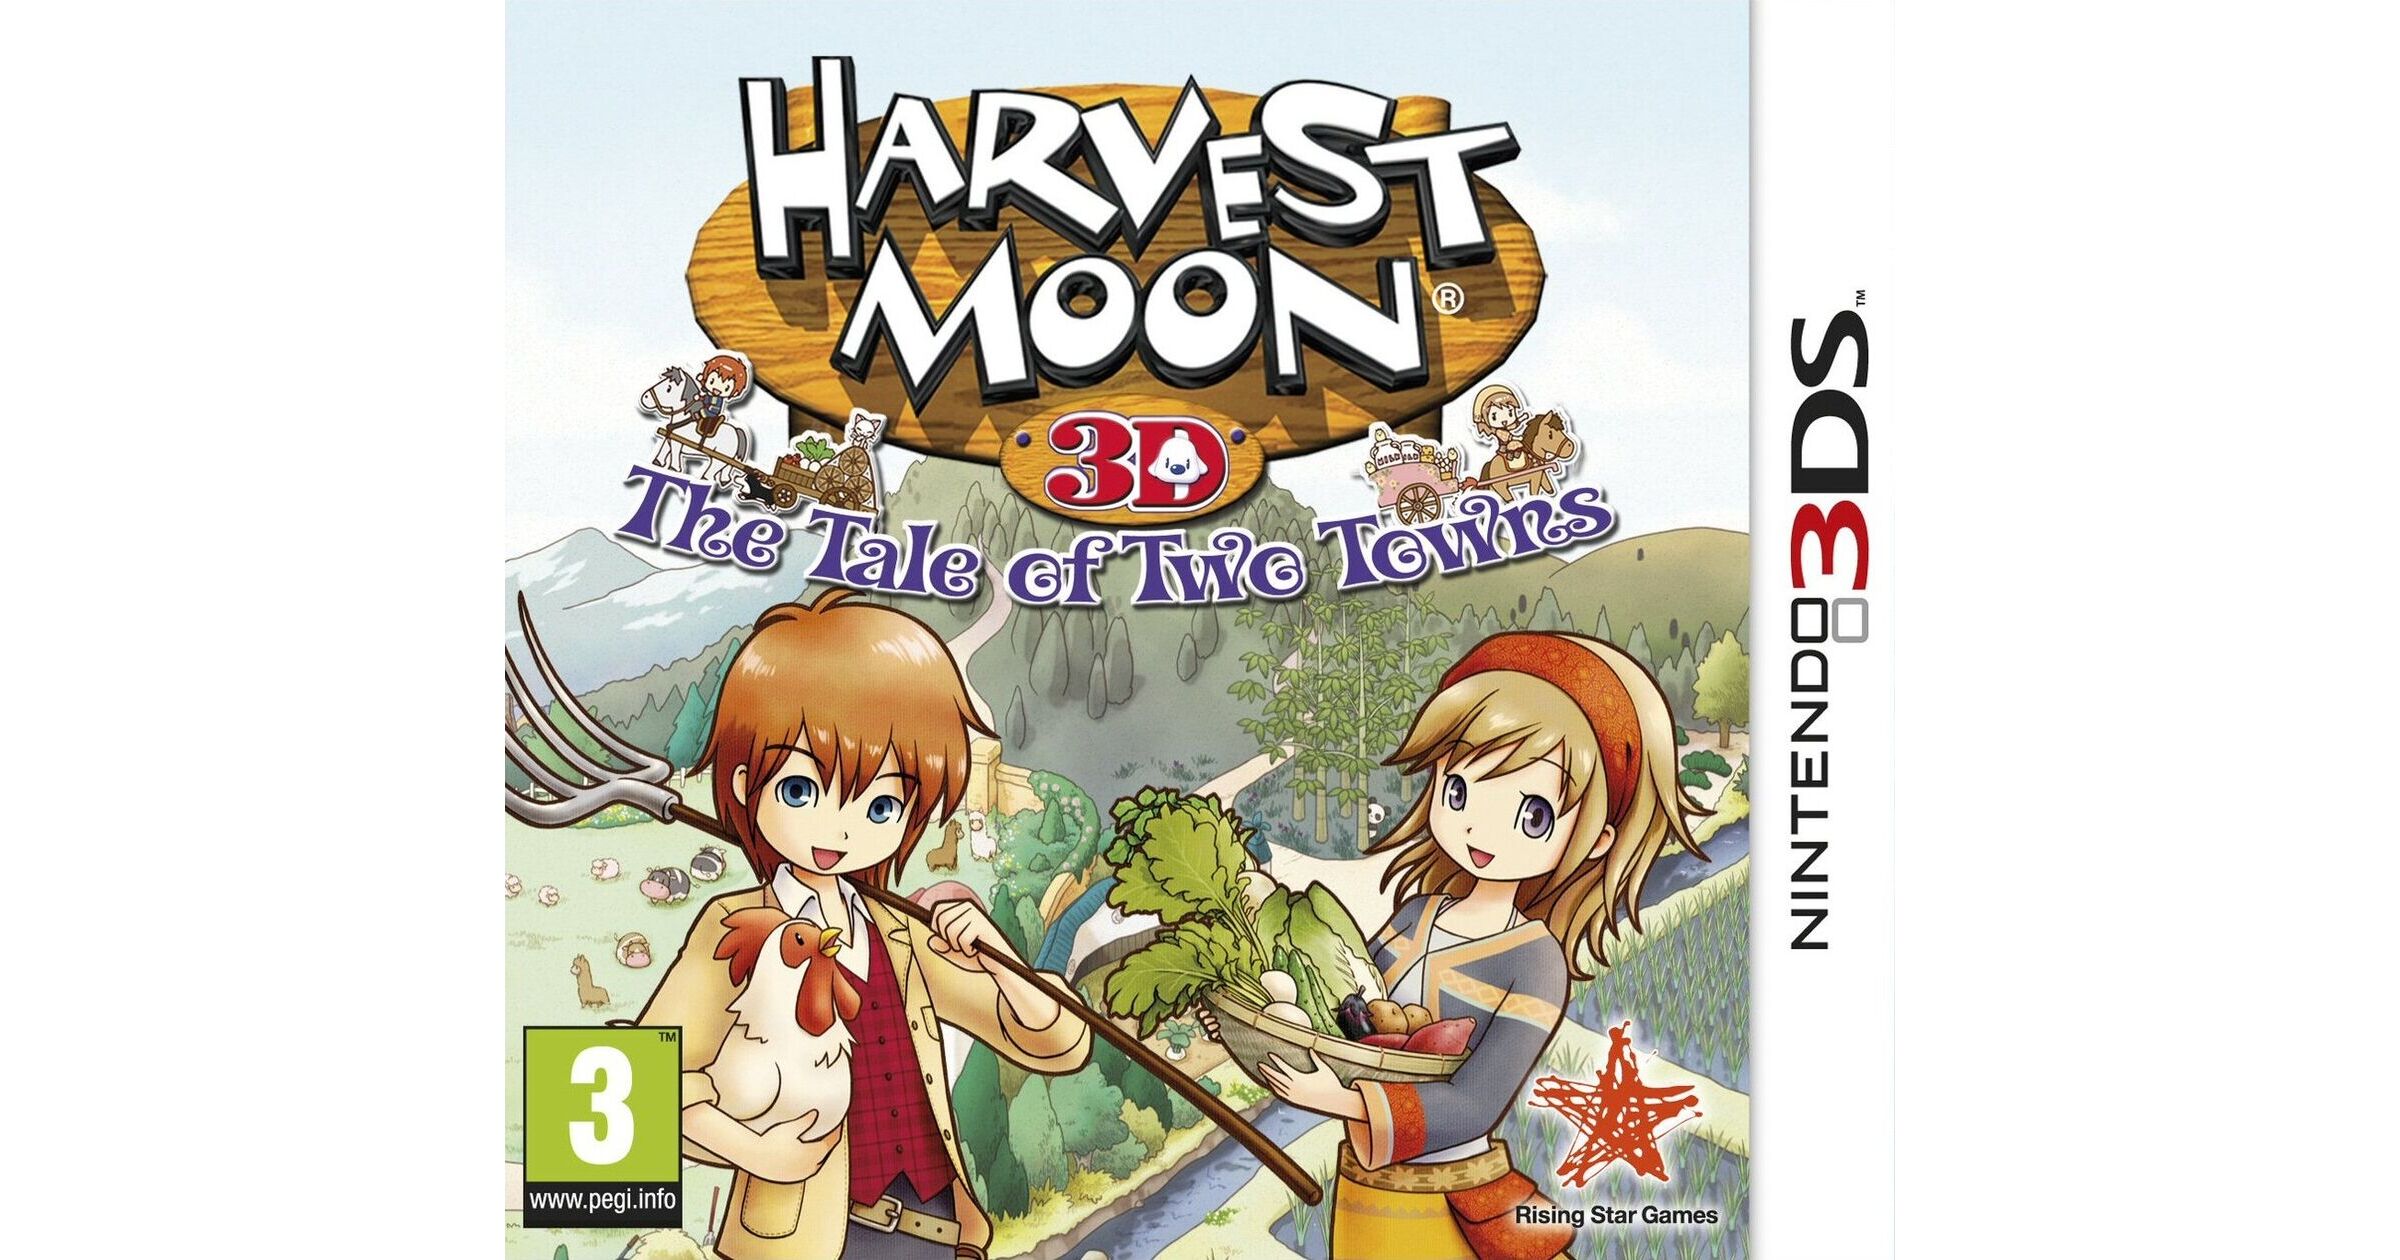 Harvest Moon: The Tale of Two Towns – Nintendo